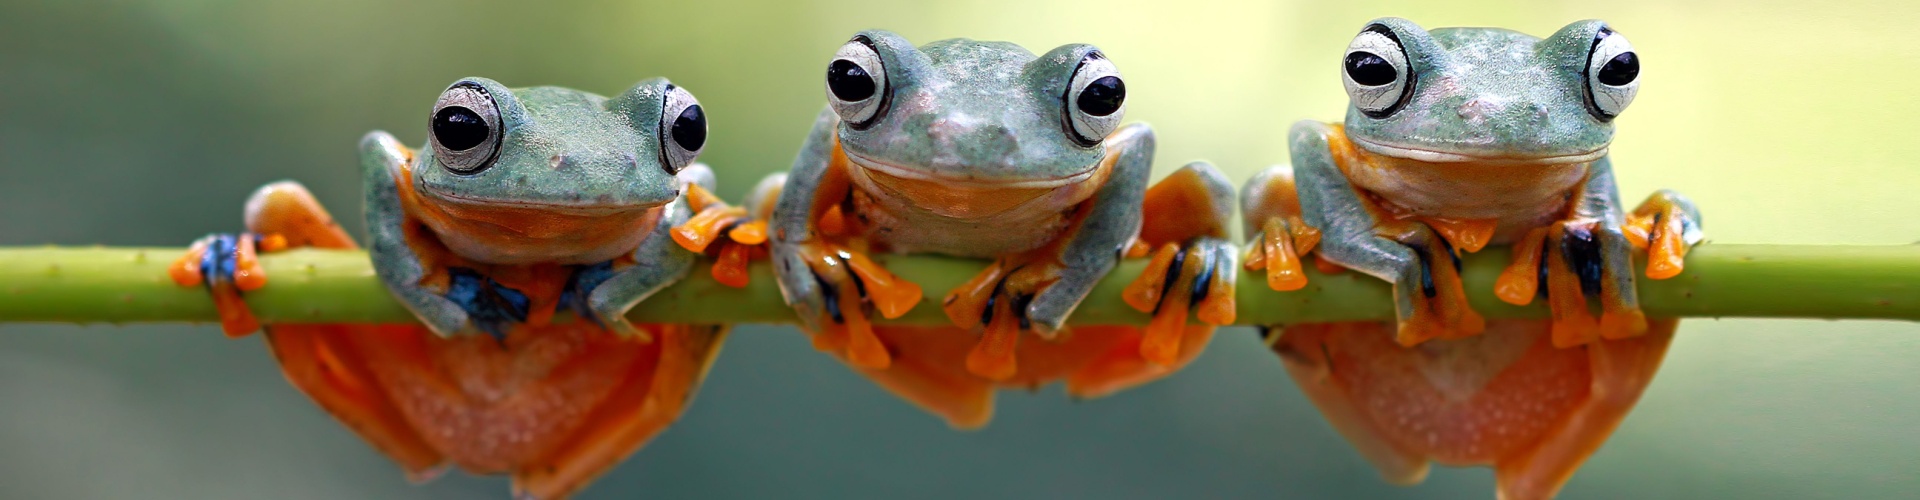 three frogs sitting on a branch